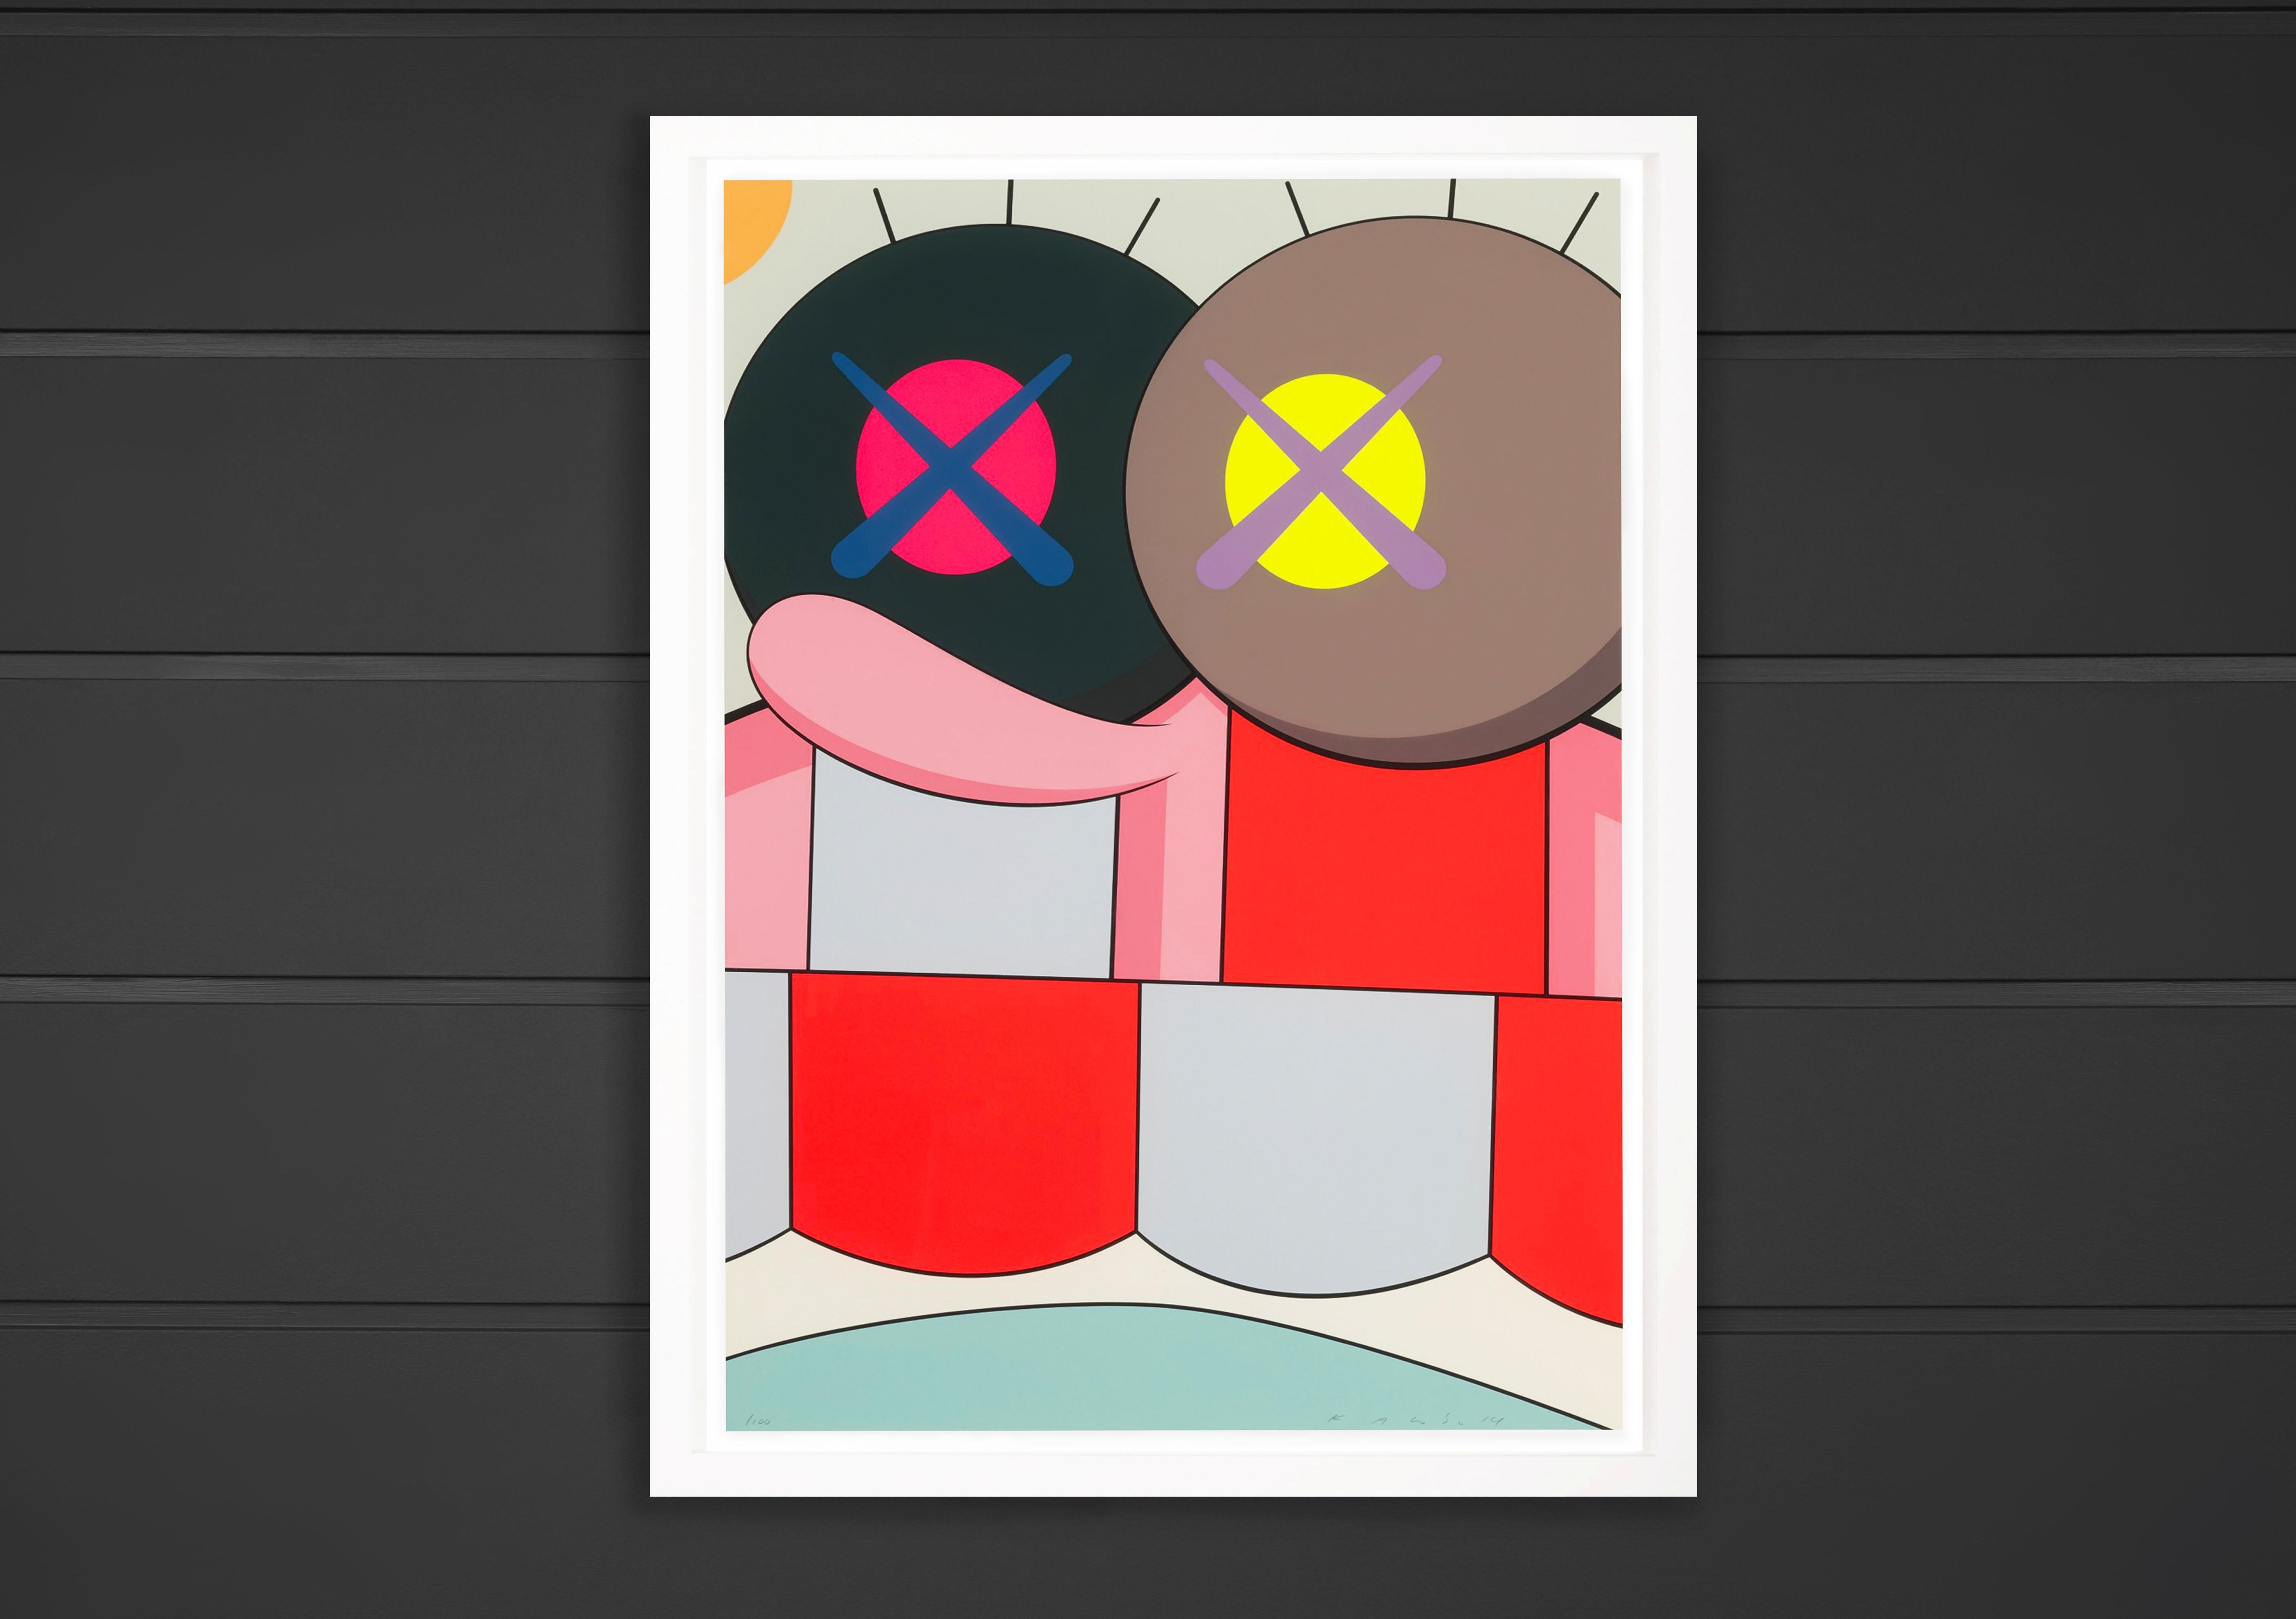 The ‘Blame Game IV' by KAWS is an exceptionally rare silkscreen print, one of the ten in the portfolio series created in 2014. A completely new, individual, brightly colored screenprint signed and numbered by the artist. The portfolio was created in